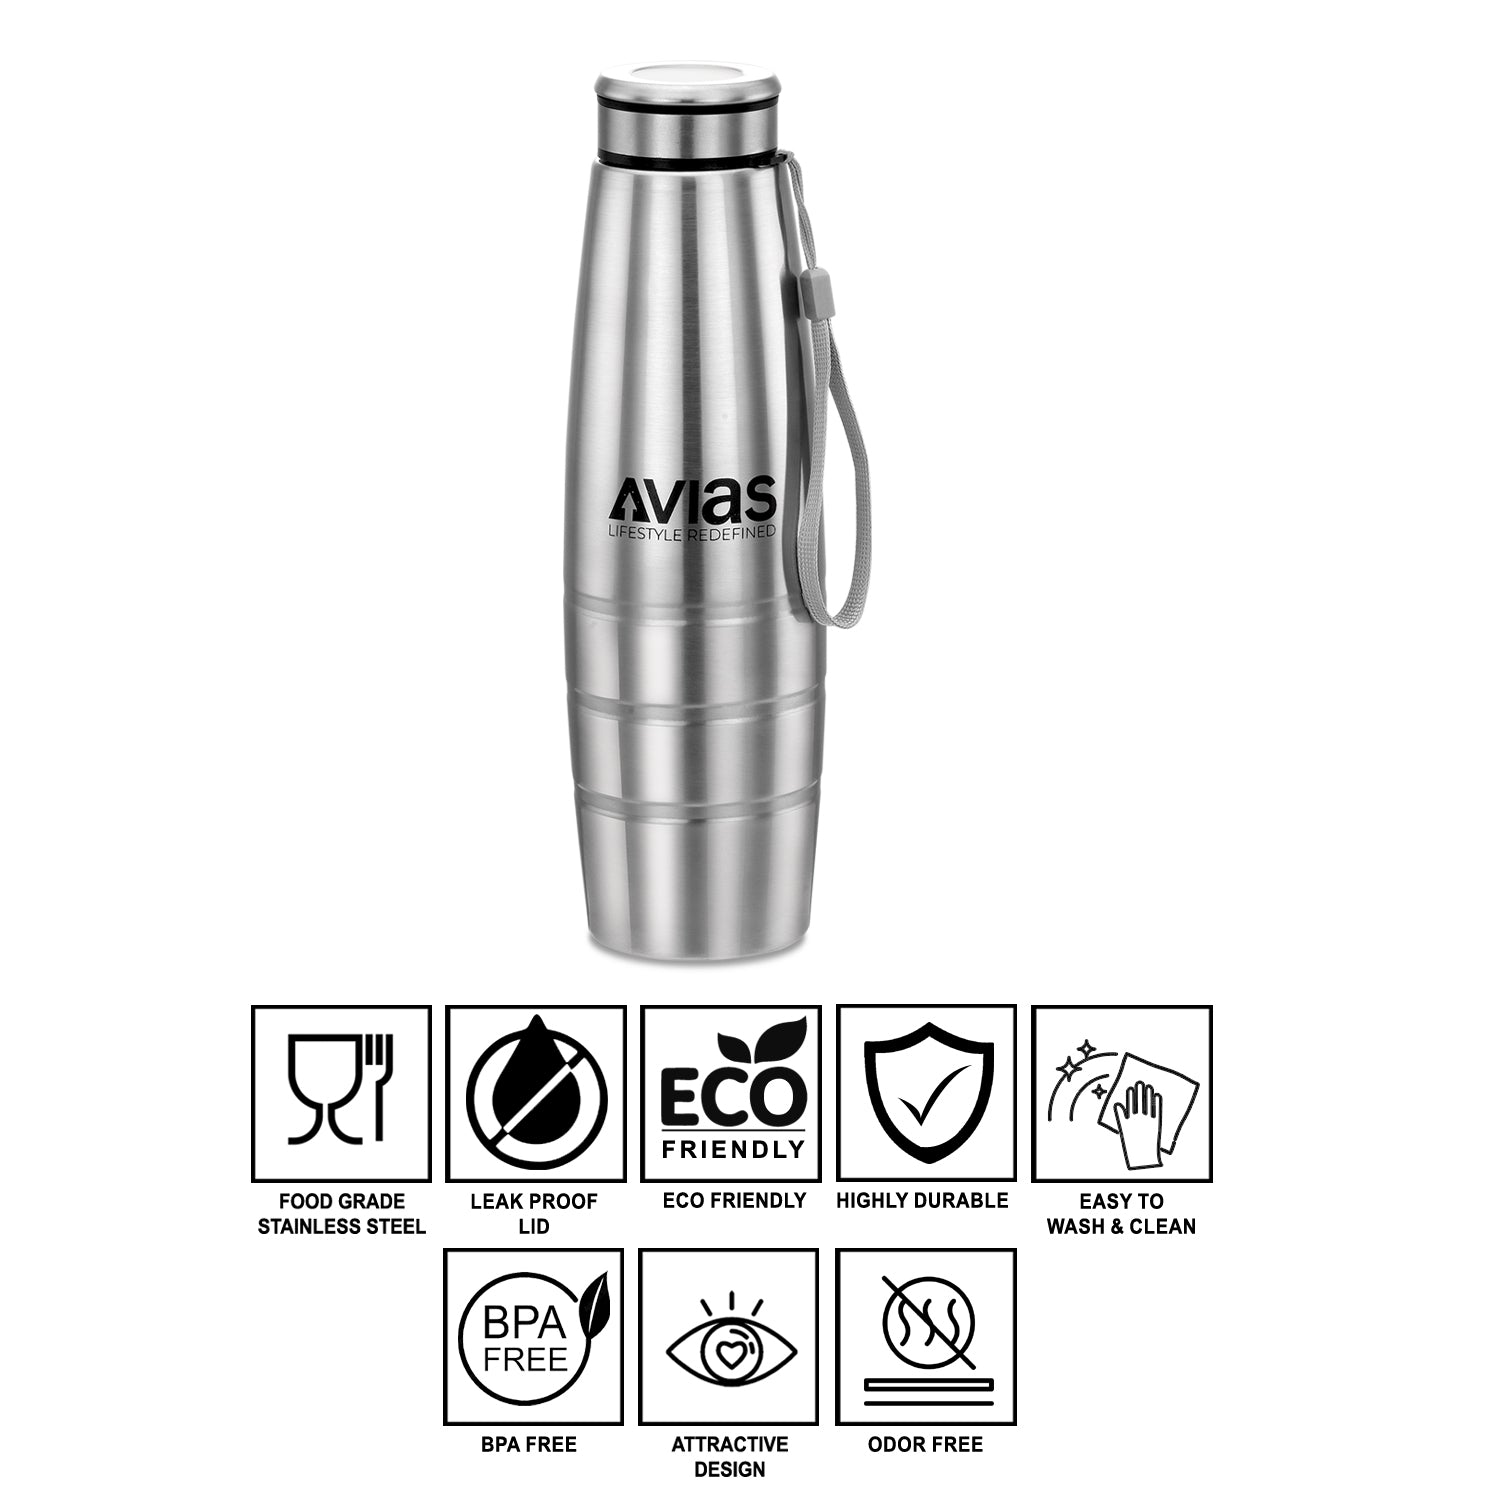 AVIAS Premia Bottle Stainless Steel features